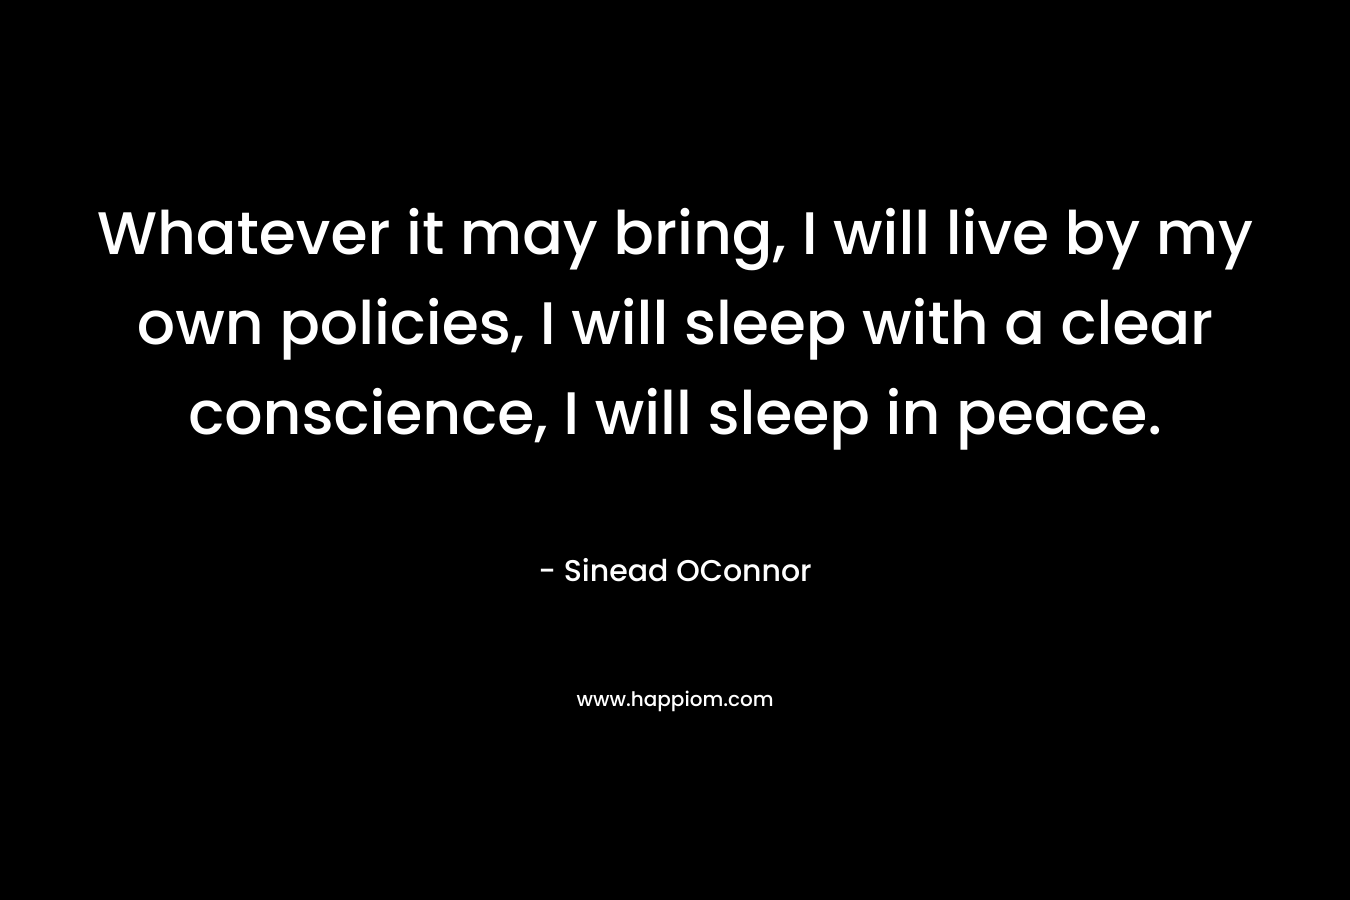 Whatever it may bring, I will live by my own policies, I will sleep with a clear conscience, I will sleep in peace.